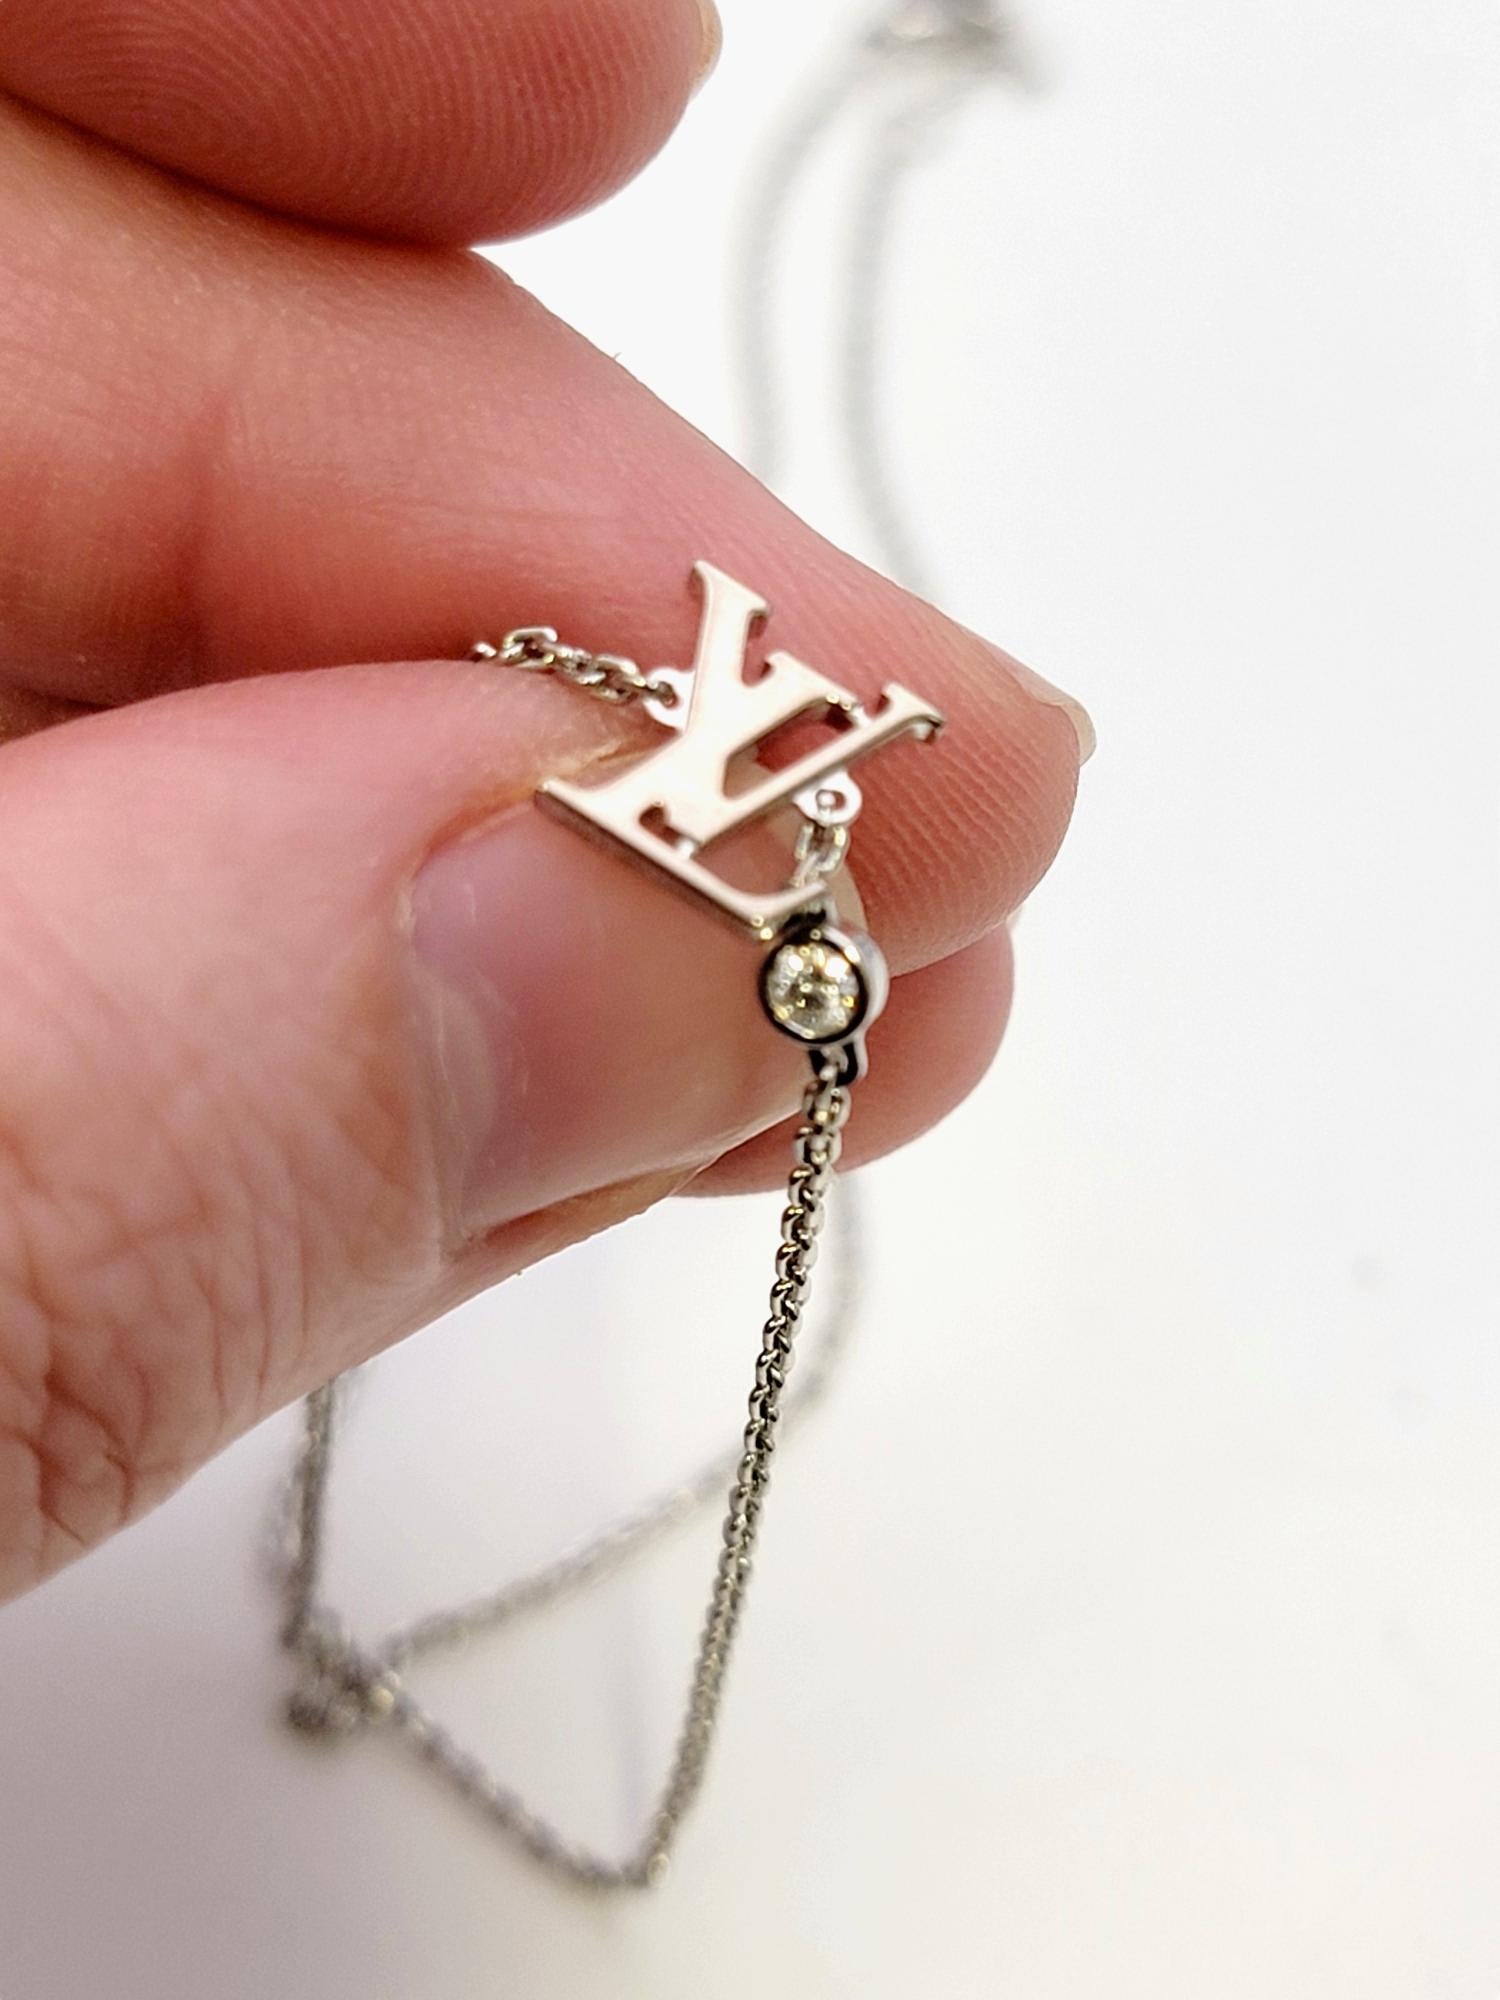 Louis Vuitton Idylle Blossom LV Pendant Necklace with Diamond in White Gold For Sale 1